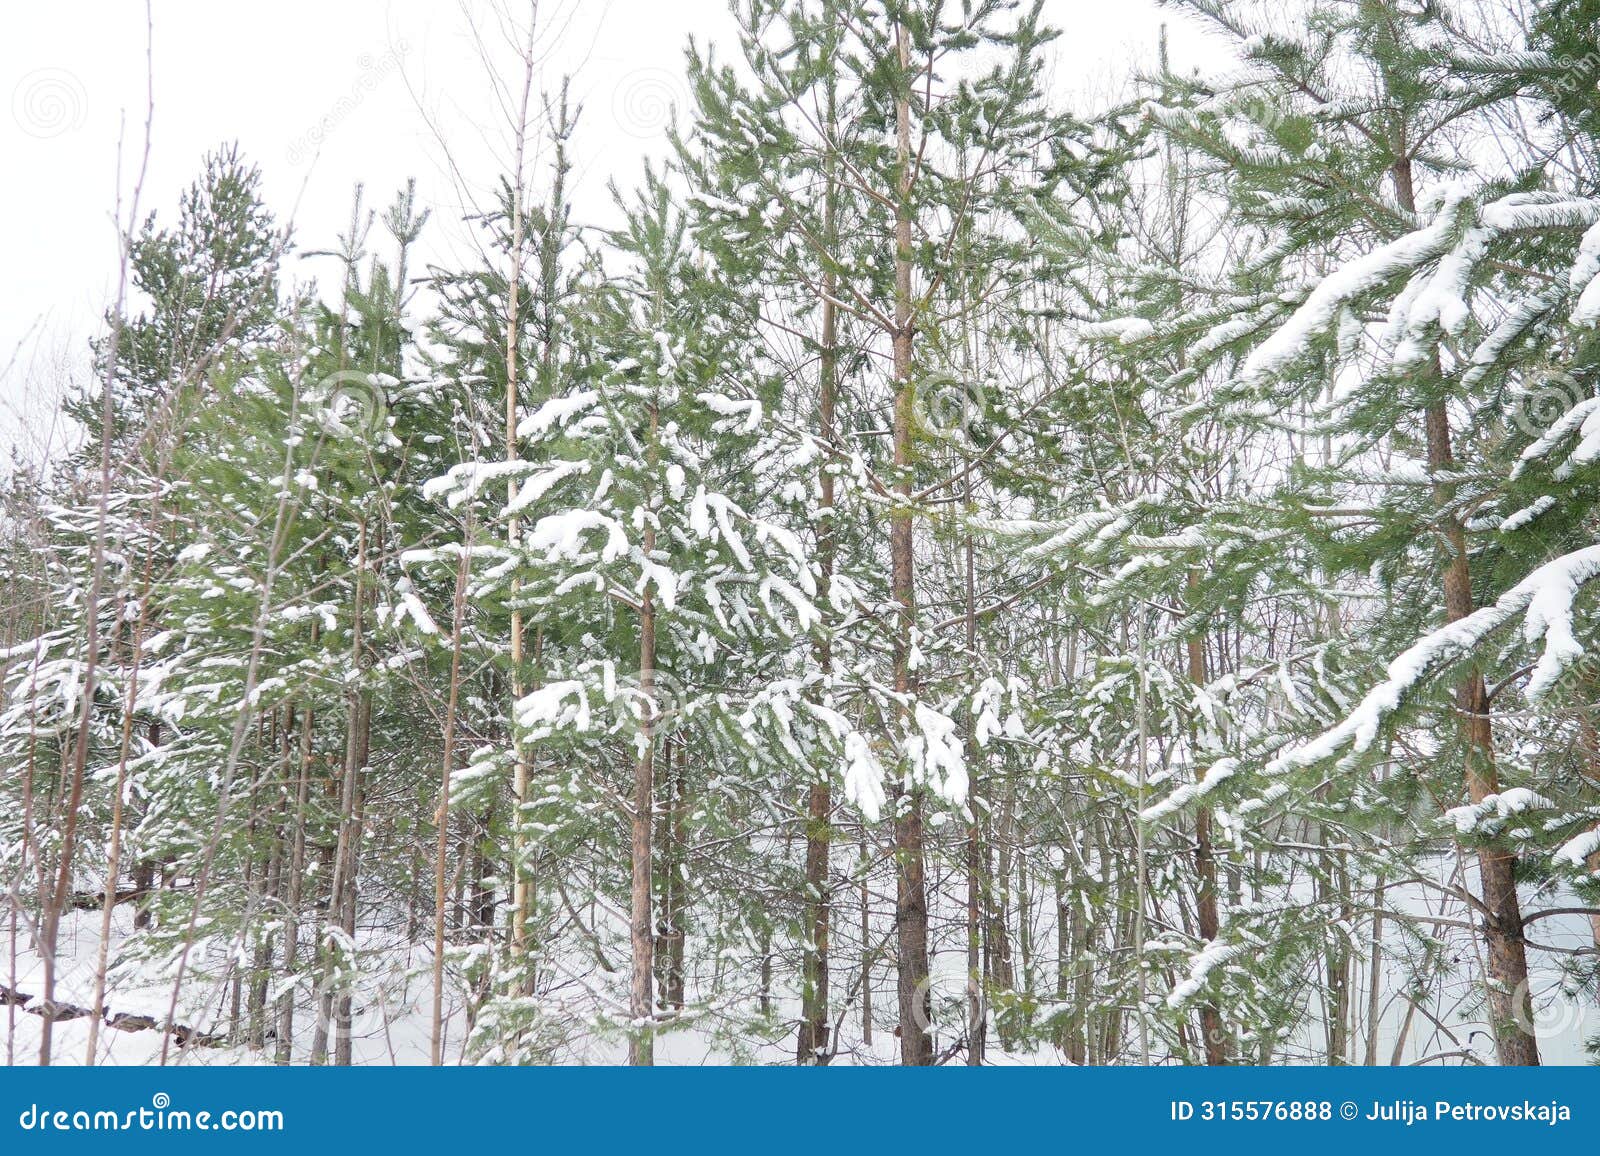 pine forest in winter during the day in severe frost, karelia. snow on the coniferous branches. frosty sunny weather